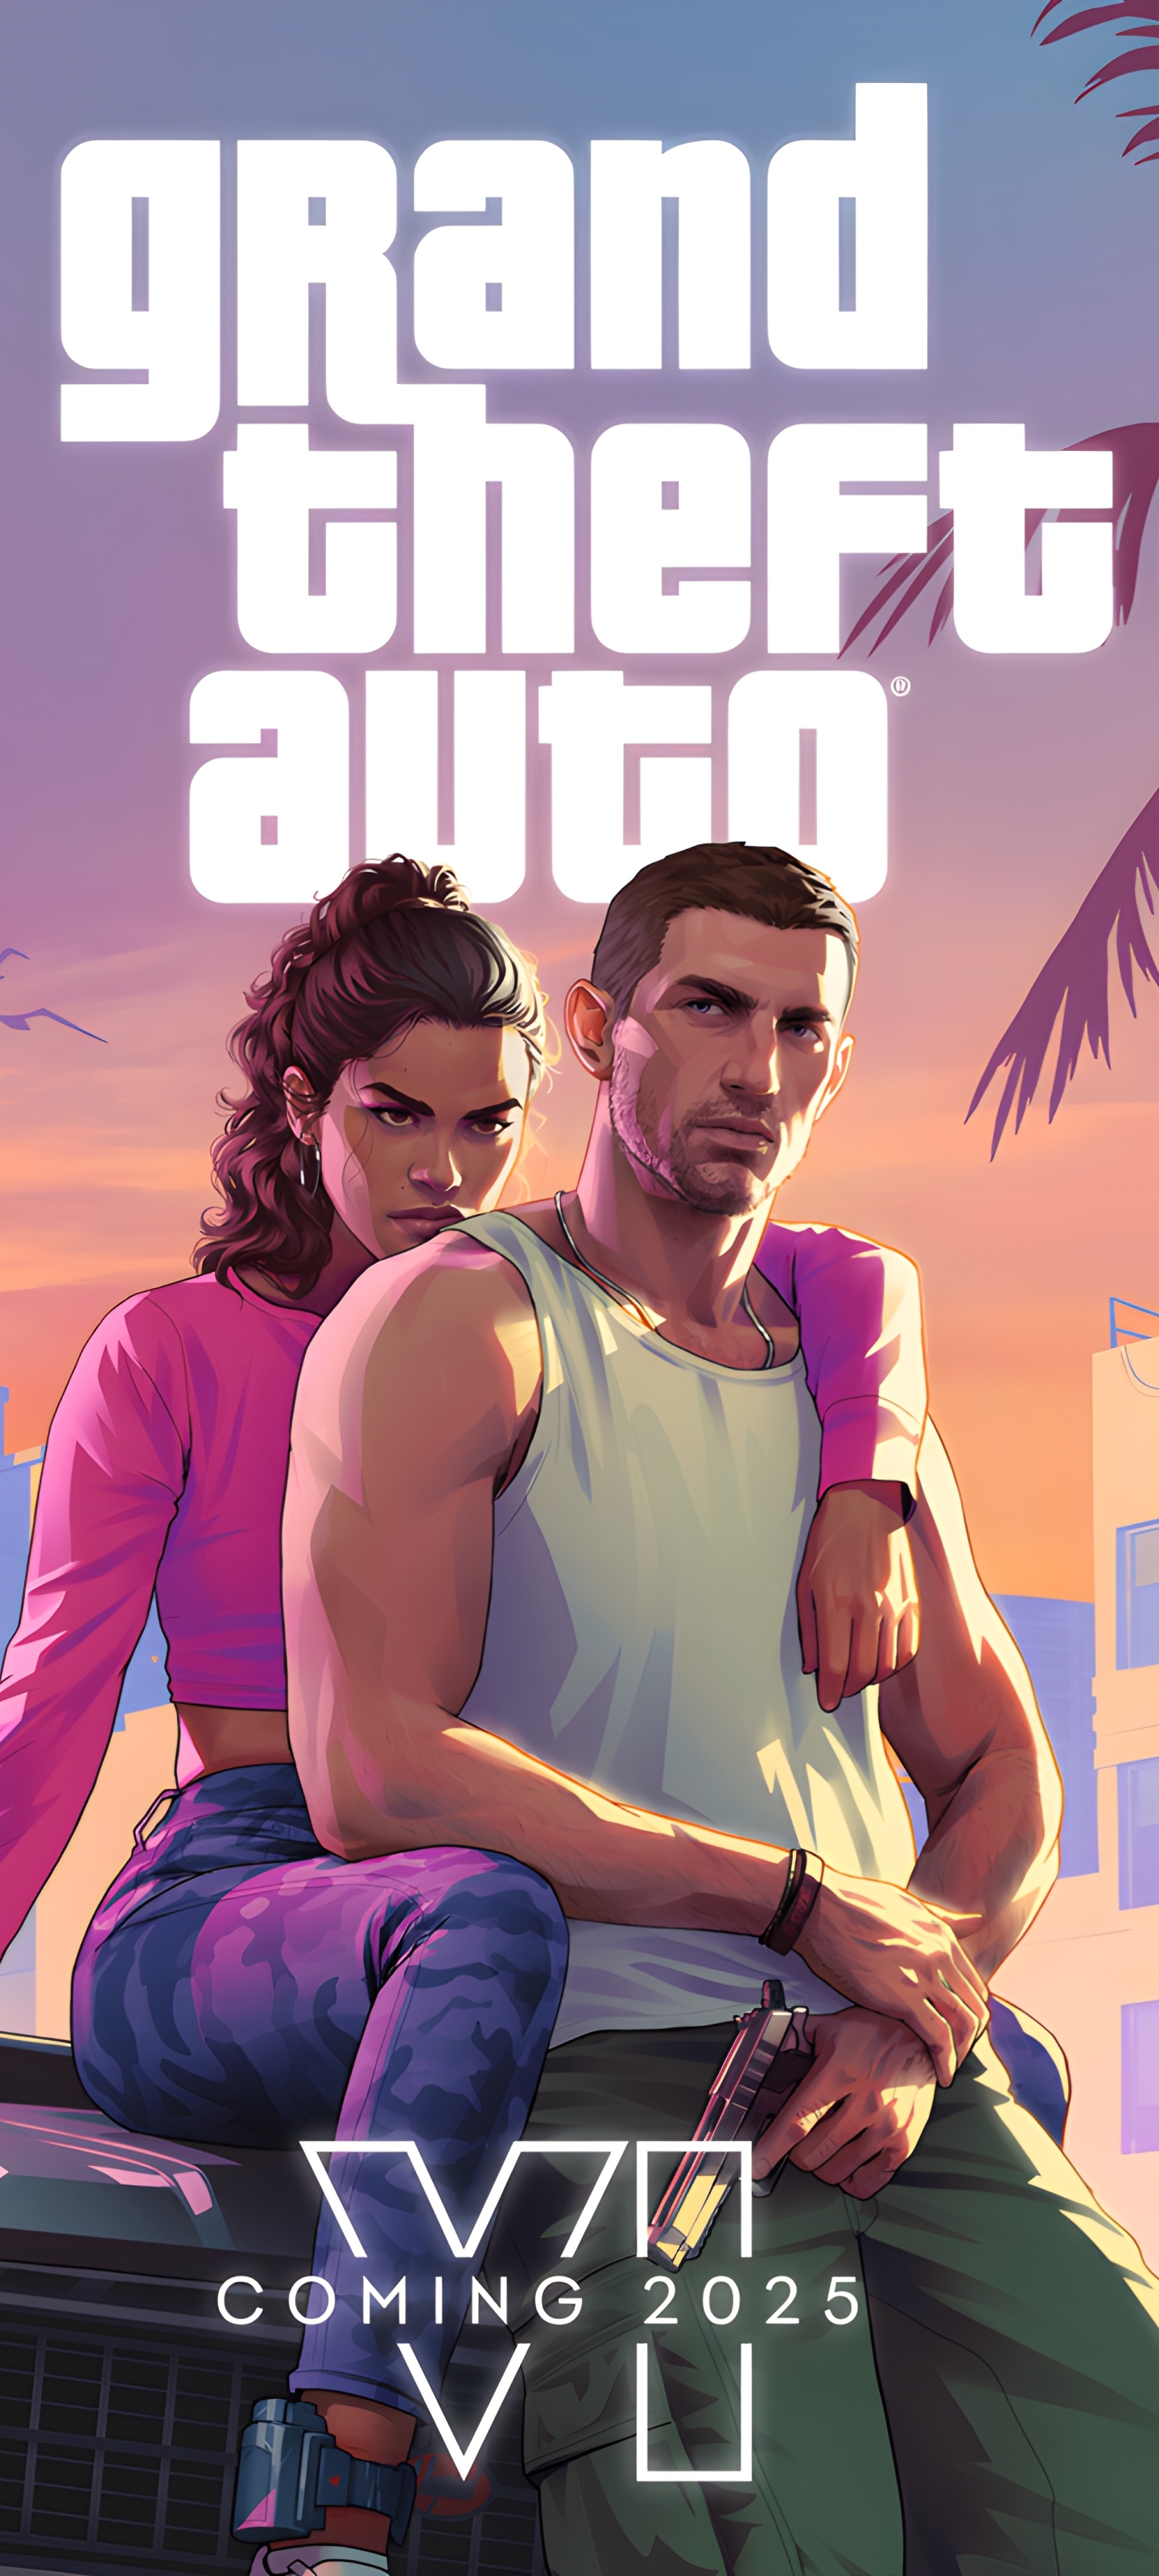 Grand Theft Auto VI Characters Poster